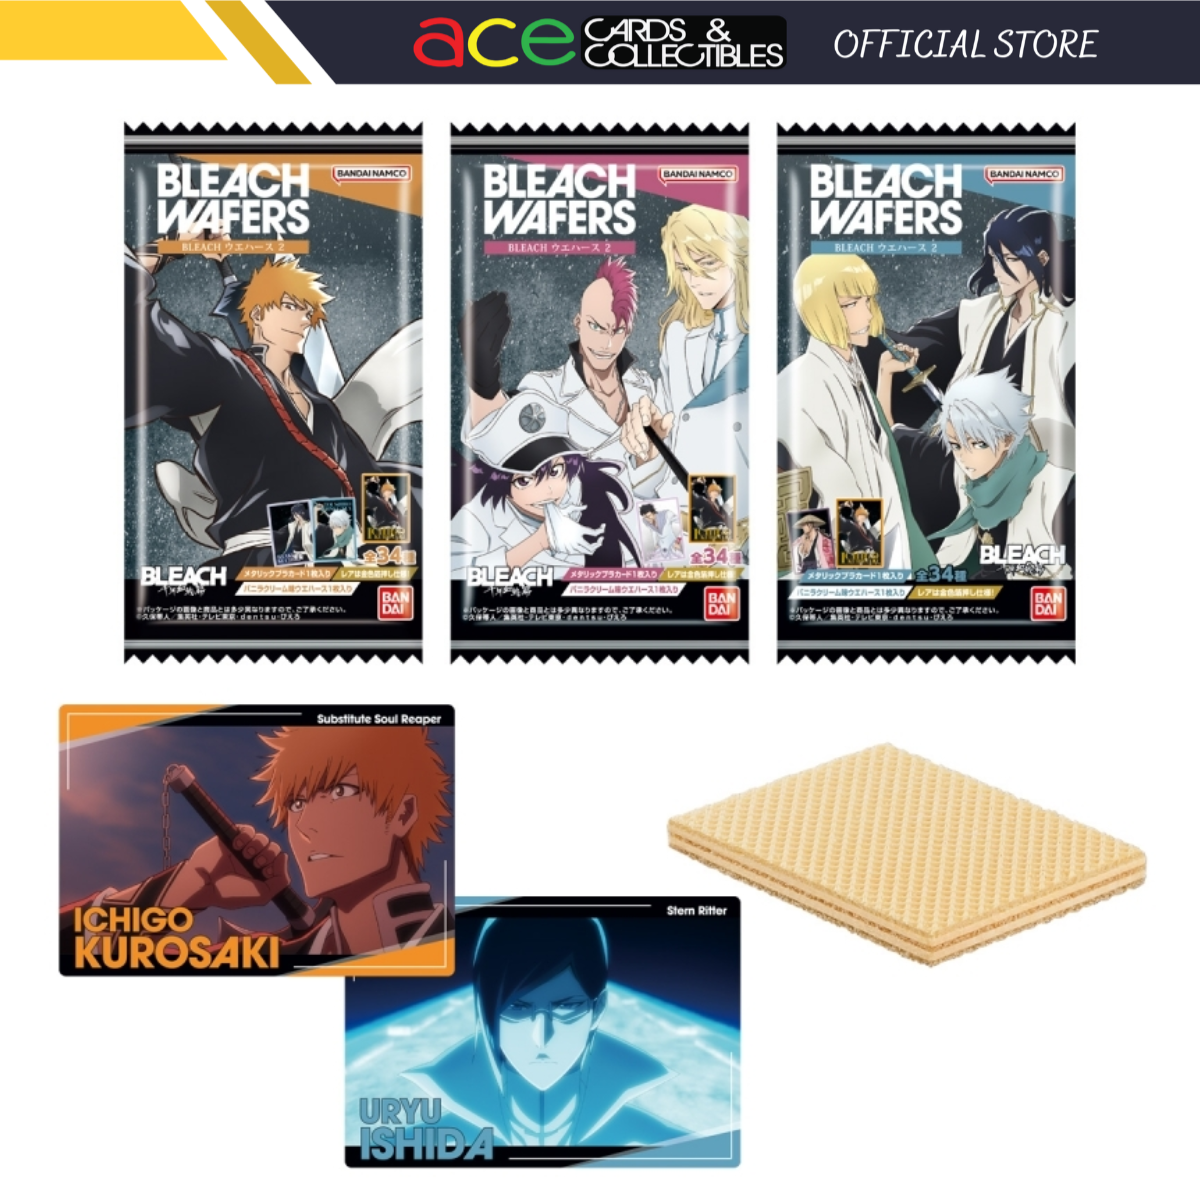 Bleach Metallic Card Collection Wafers 2-Whole Box (20packs)-Bandai-Ace Cards & Collectibles